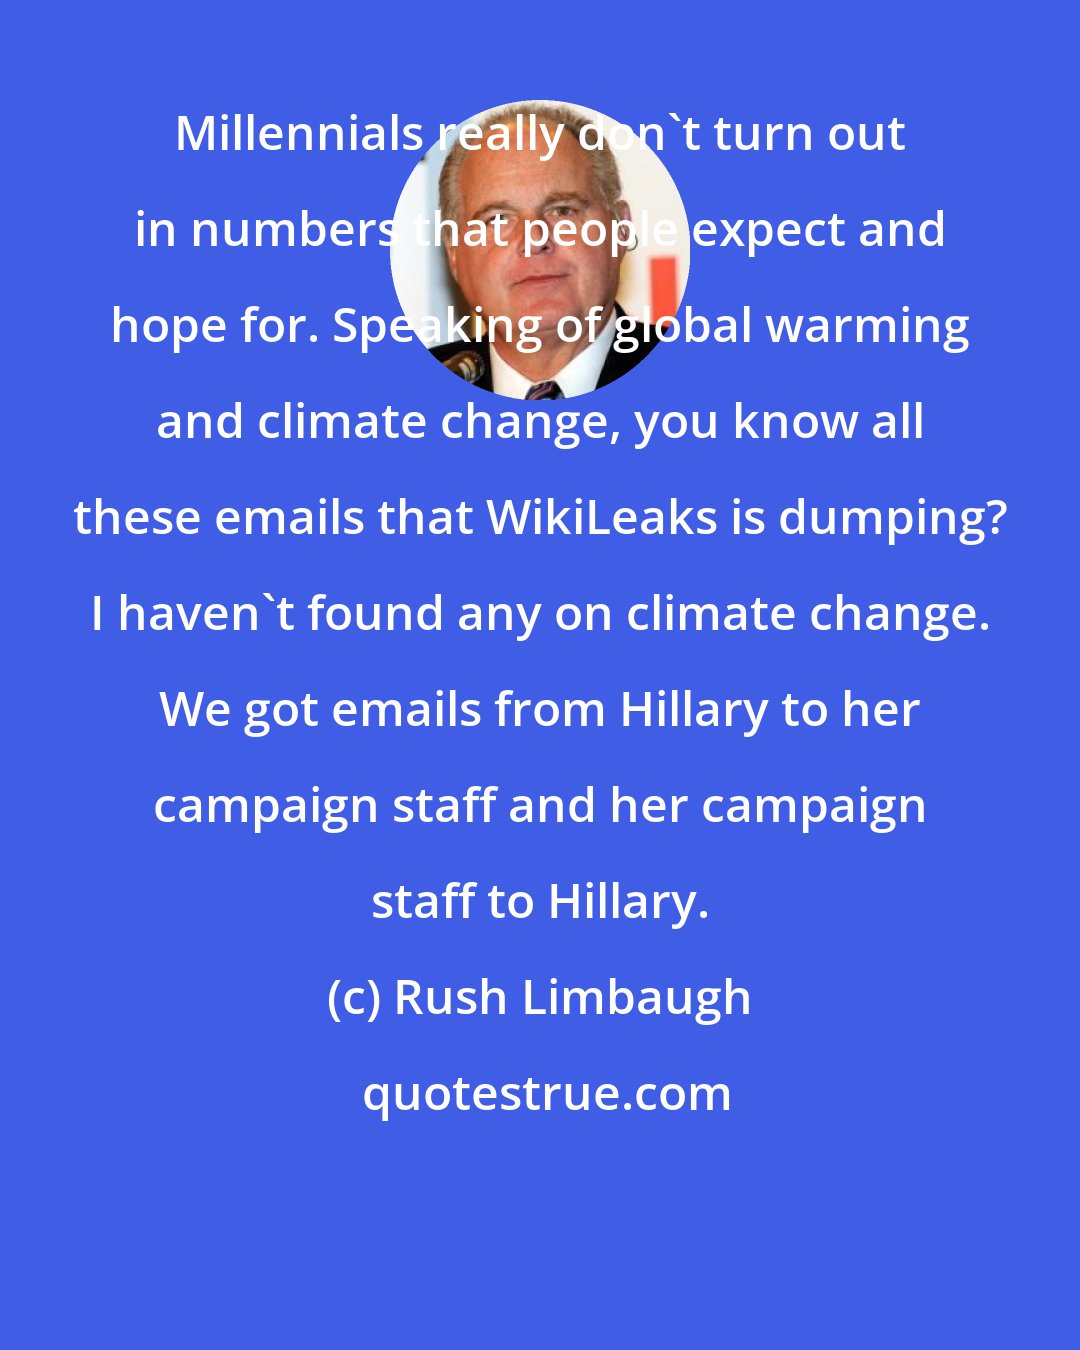 Rush Limbaugh: Millennials really don't turn out in numbers that people expect and hope for. Speaking of global warming and climate change, you know all these emails that WikiLeaks is dumping? I haven't found any on climate change. We got emails from Hillary to her campaign staff and her campaign staff to Hillary.